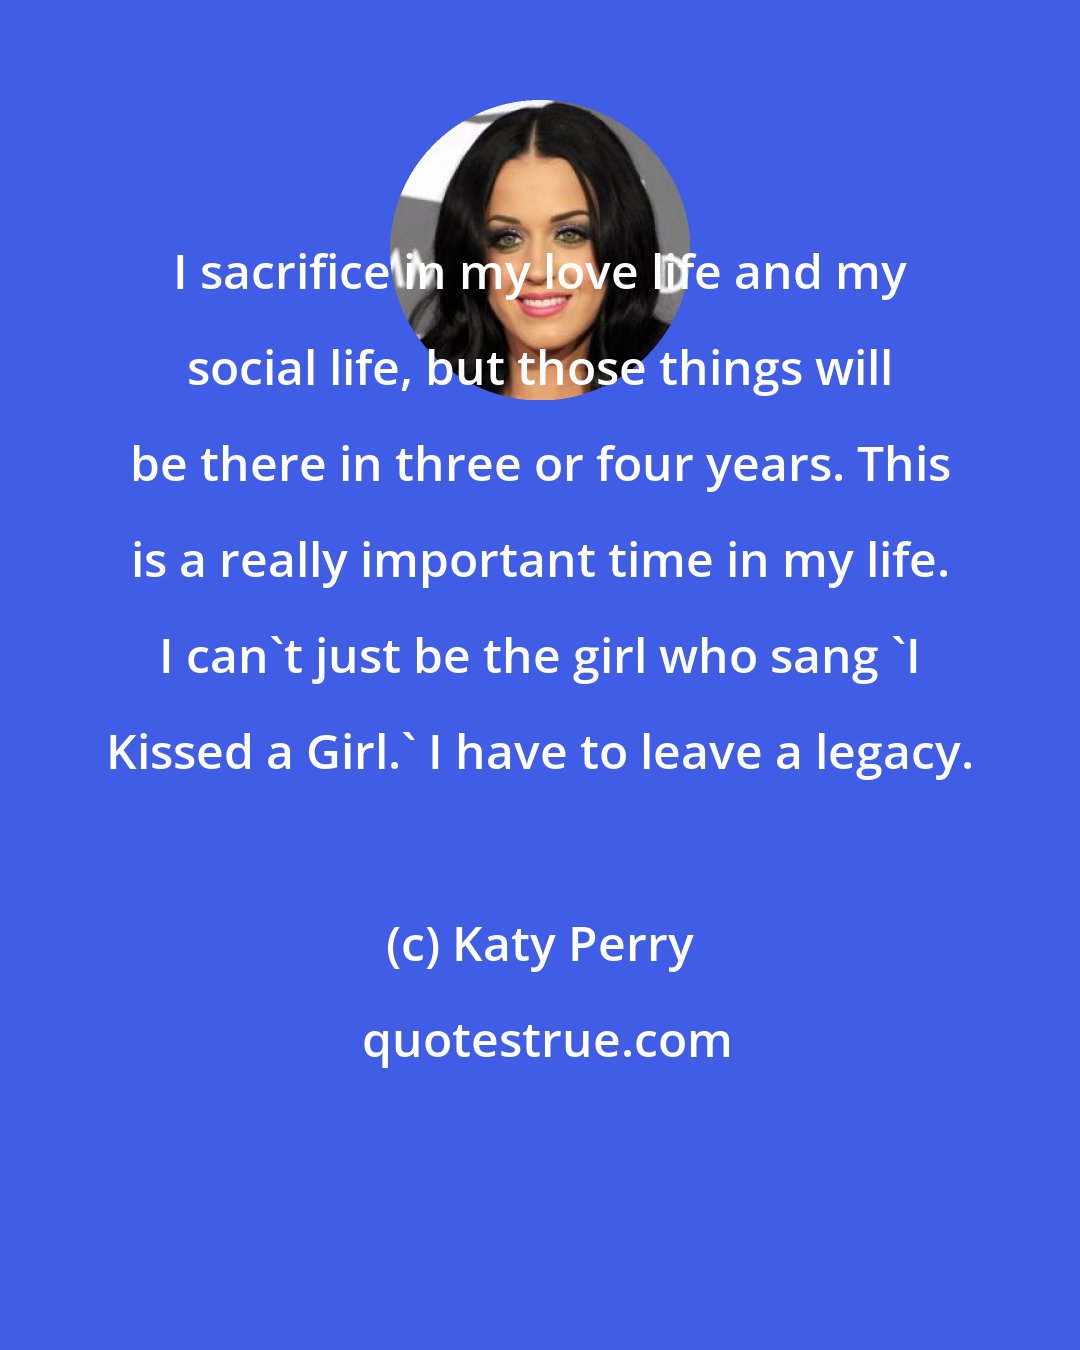 Katy Perry: I sacrifice in my love life and my social life, but those things will be there in three or four years. This is a really important time in my life. I can't just be the girl who sang 'I Kissed a Girl.' I have to leave a legacy.